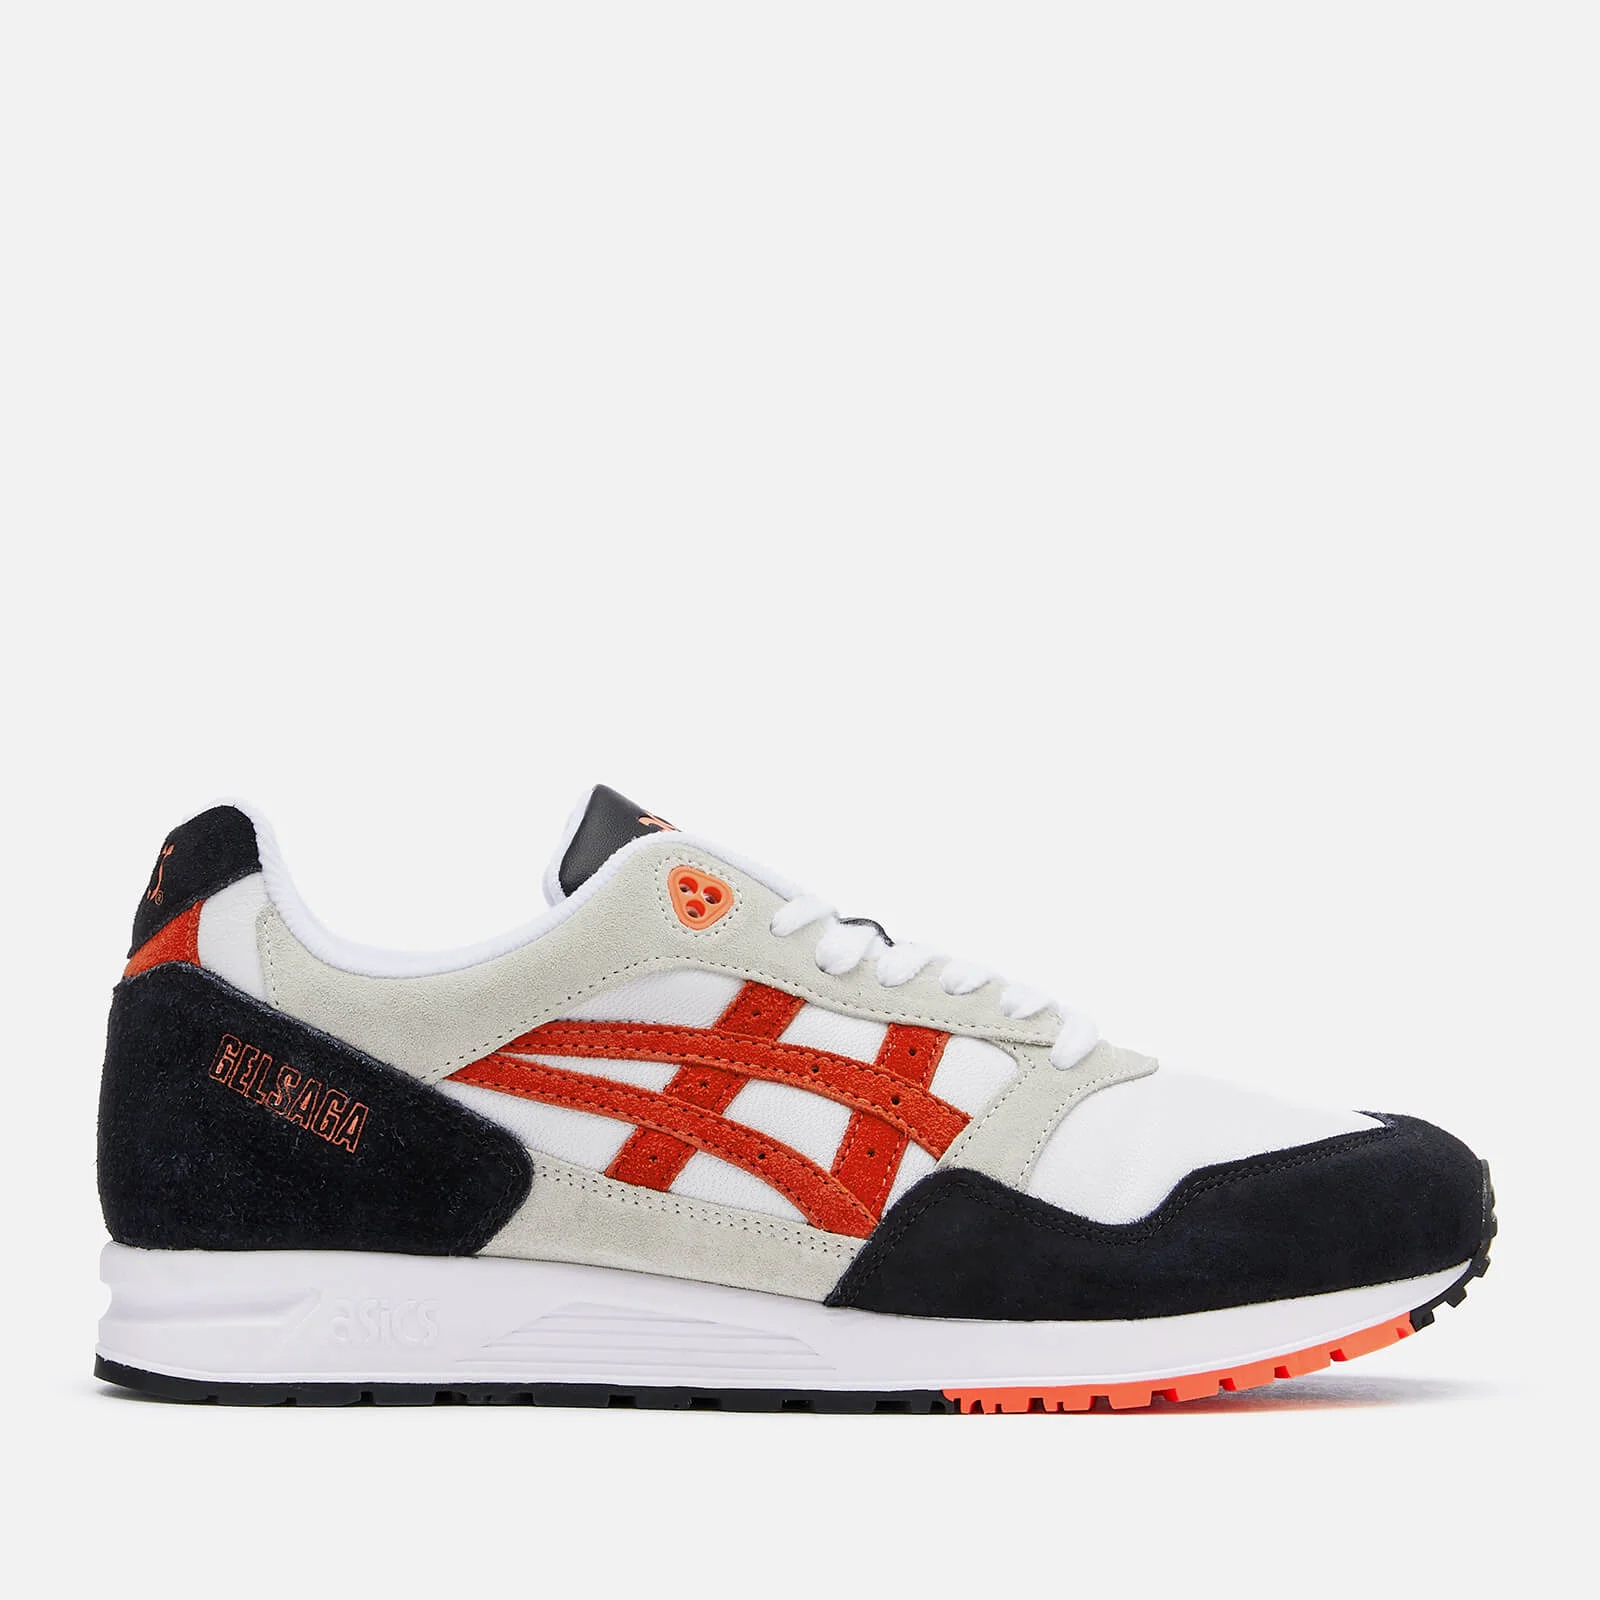 Asics Lifestyle Men's Gelsaga Leather Trainers - White/Flash Coral Image 1